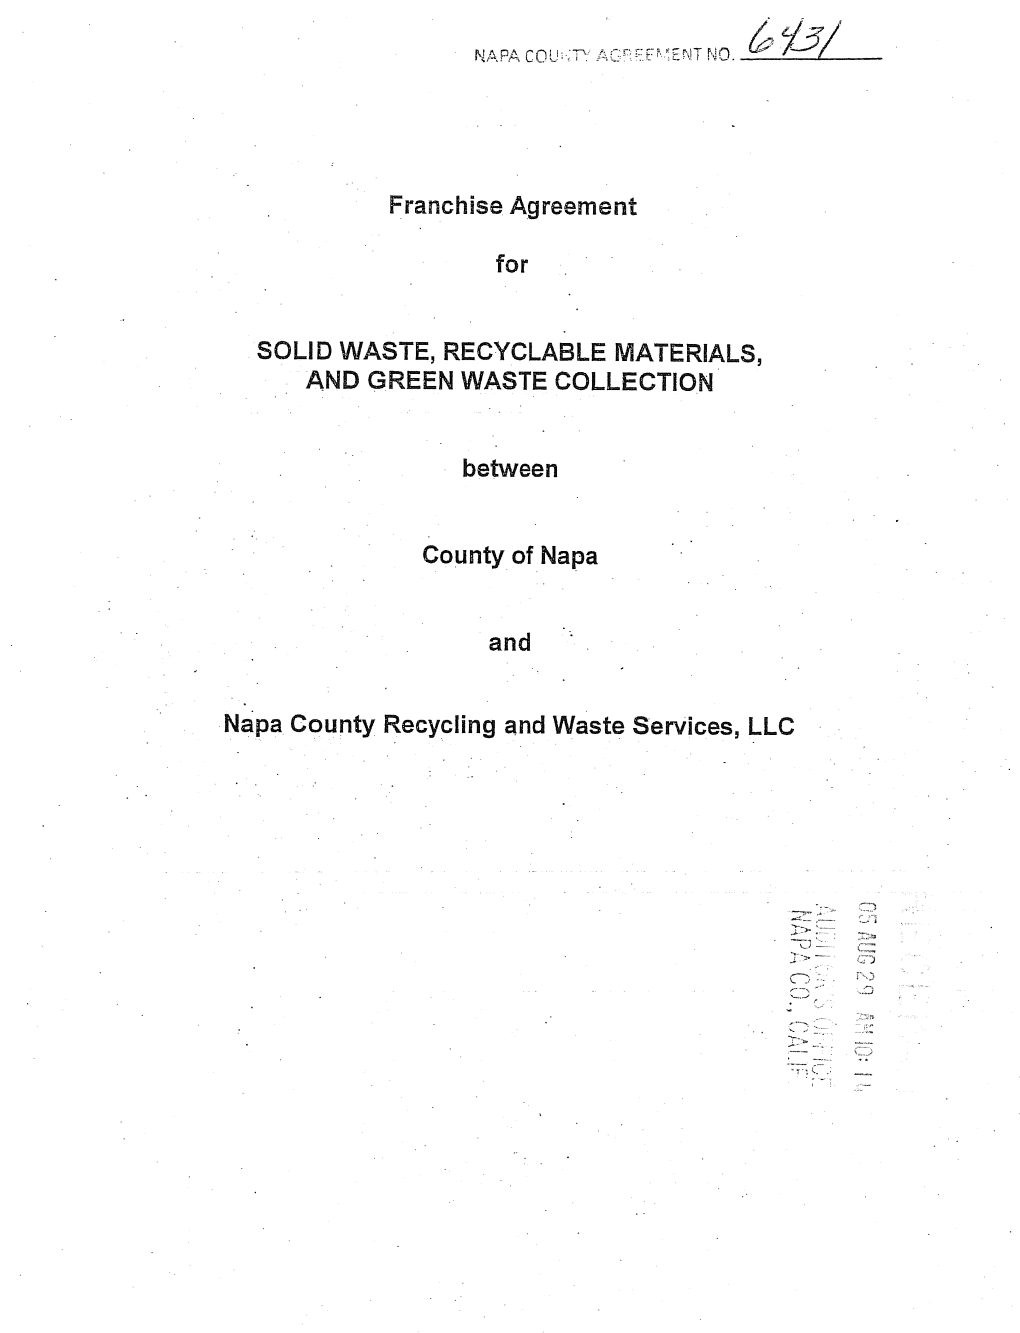 Agreement, Solid Waste, Recyclable Materials, Green Waste Collection